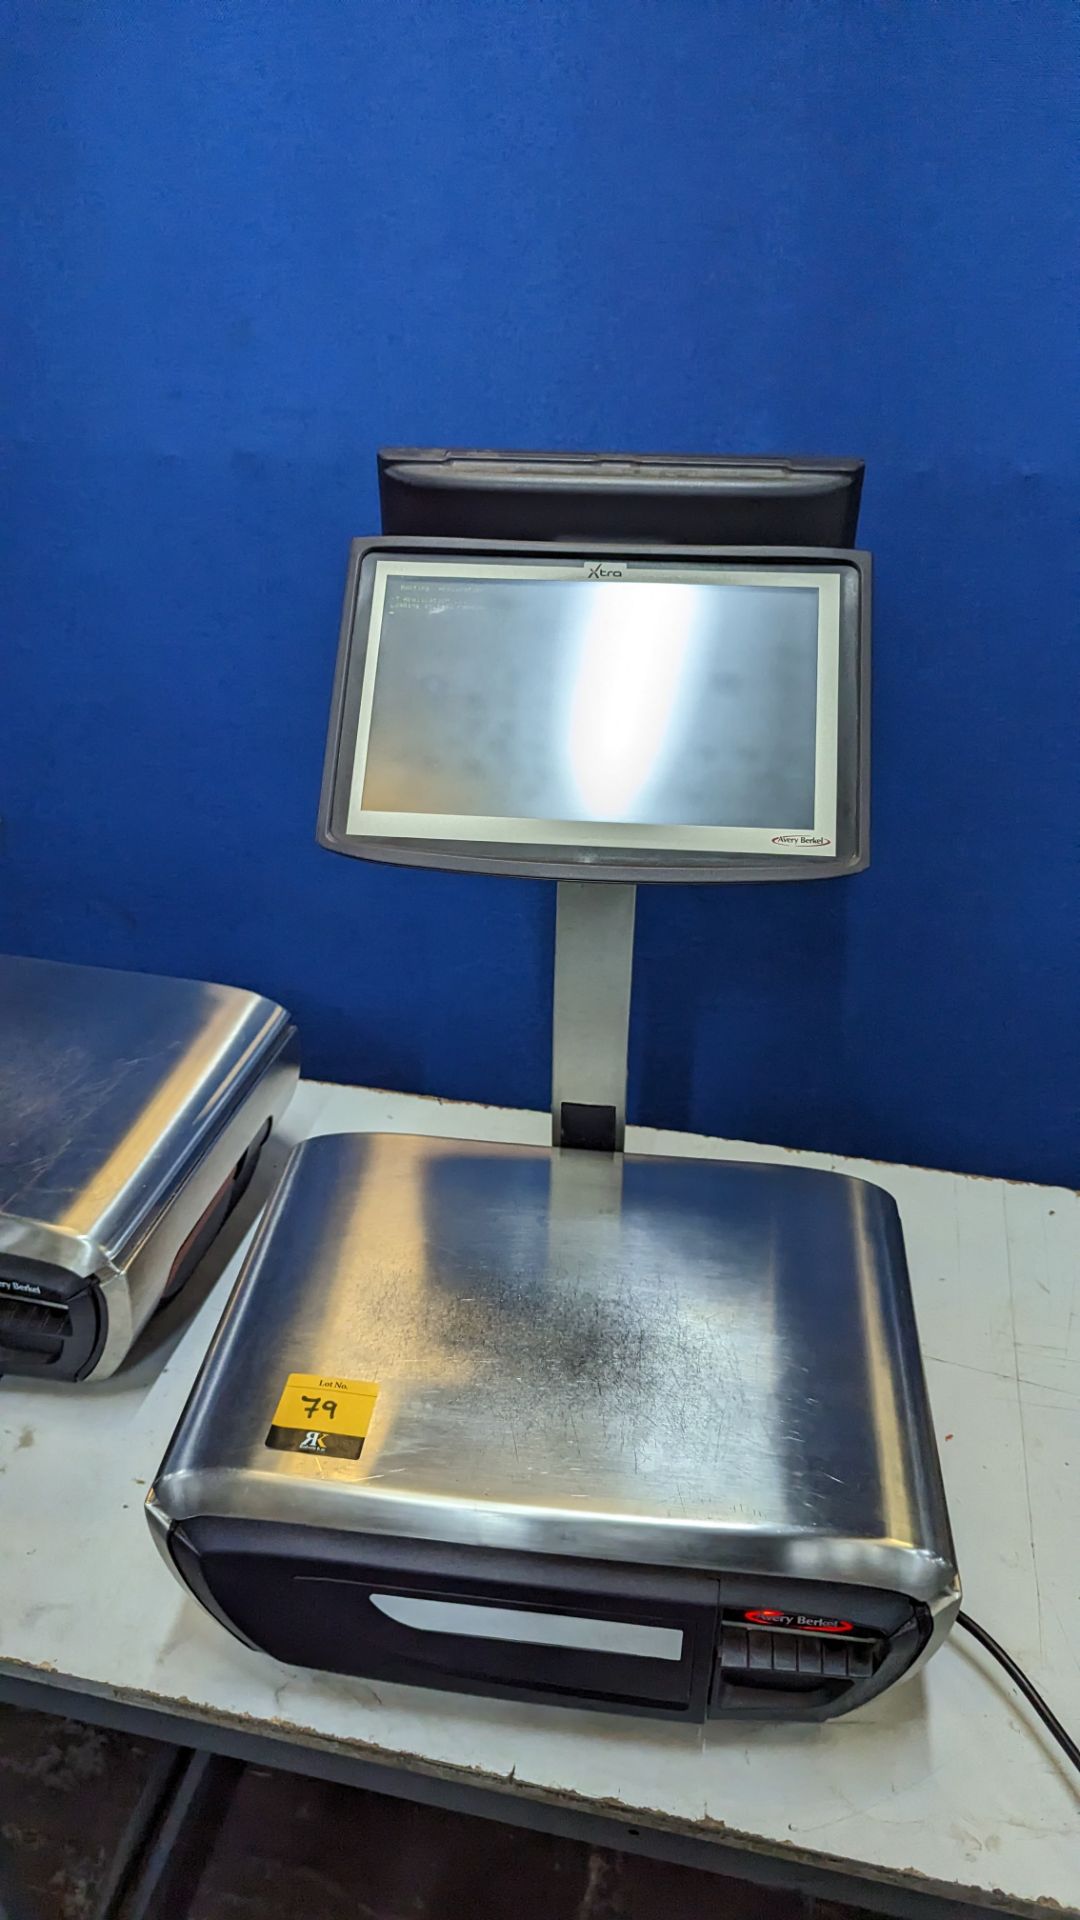 Avery Berkel Xti 400 Label & Receipt printing scale. 6kg/15kg capacity. These scales include a 10"